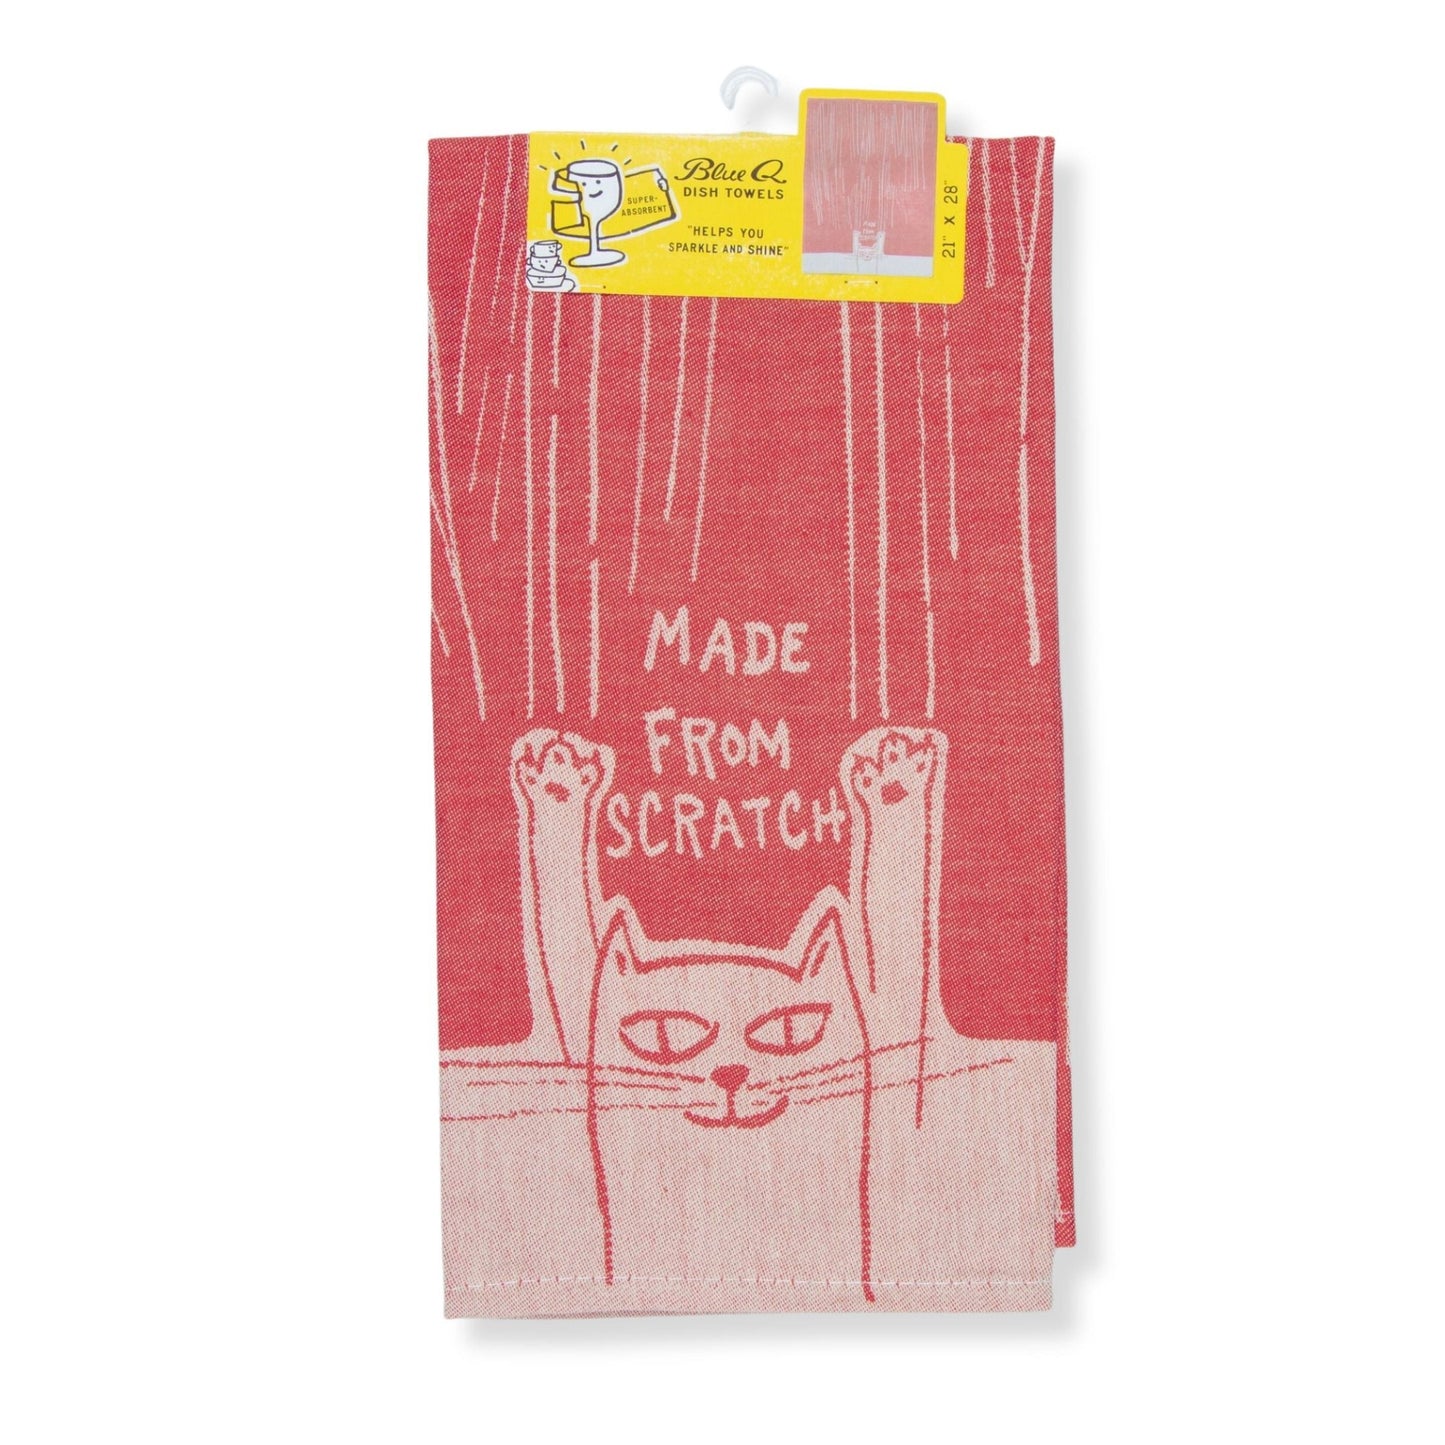 Made From Scratch Kitty Cat Woven Funny Snarky Dish Cloth Towel | Soft Absorbent Jacquard | 100% Cotton Hand or Tea Towel 21" x 28"